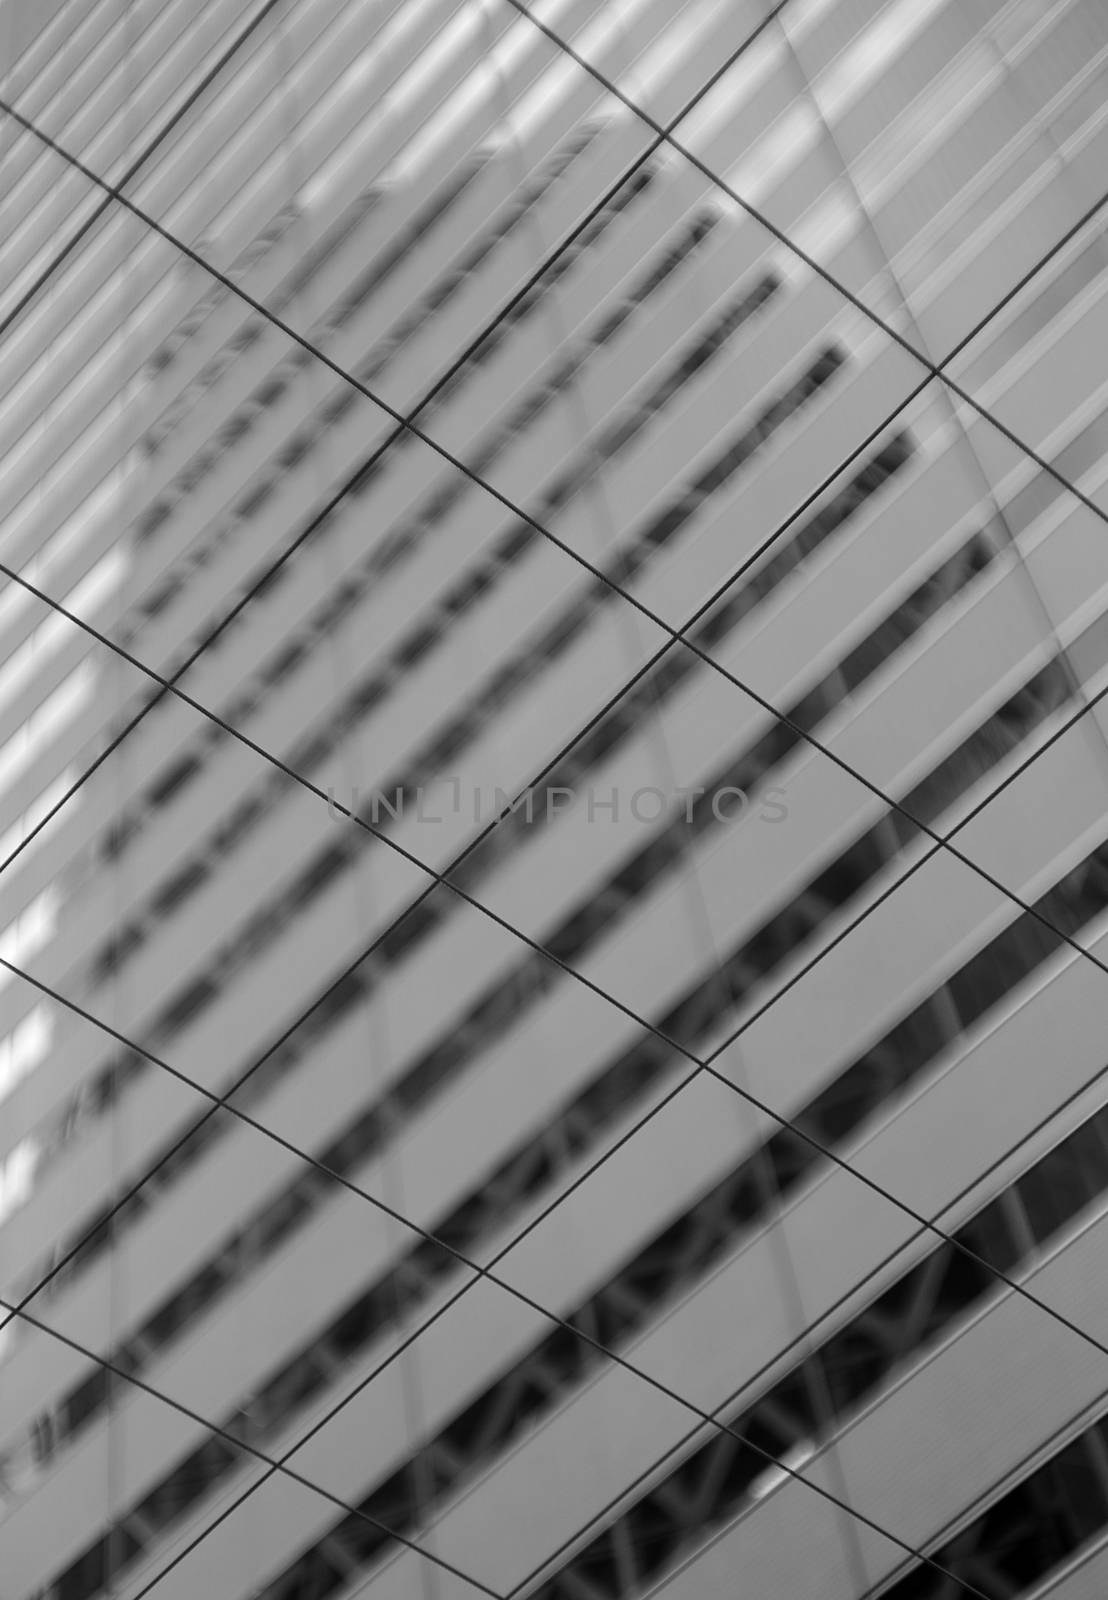 Reflection of the Cocoon Tower through the grid.